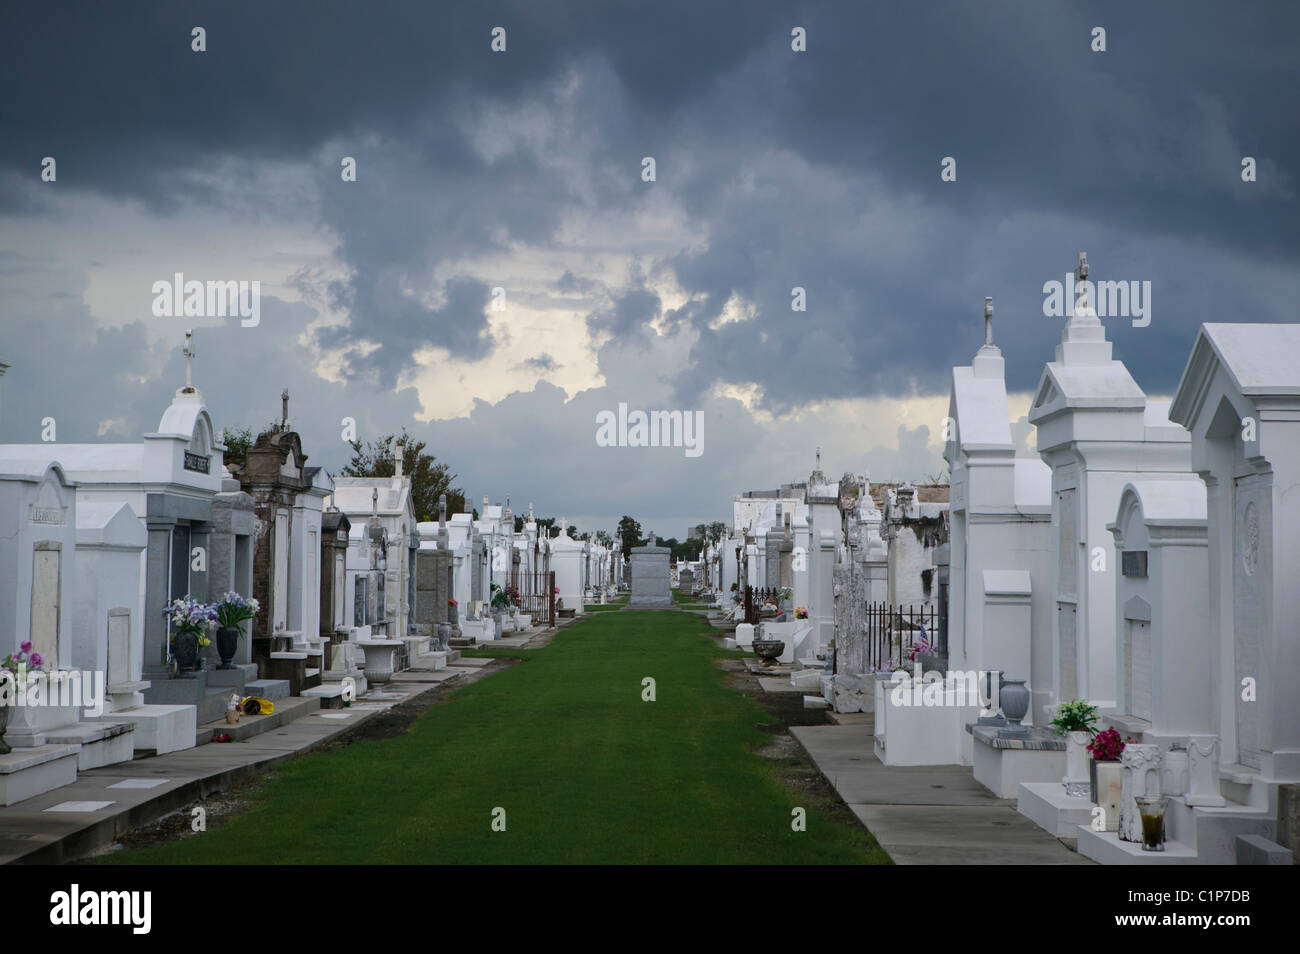 St. Louis Cemetery No. 1 with Gray Clouds overhead, New Orleans Stock Photo